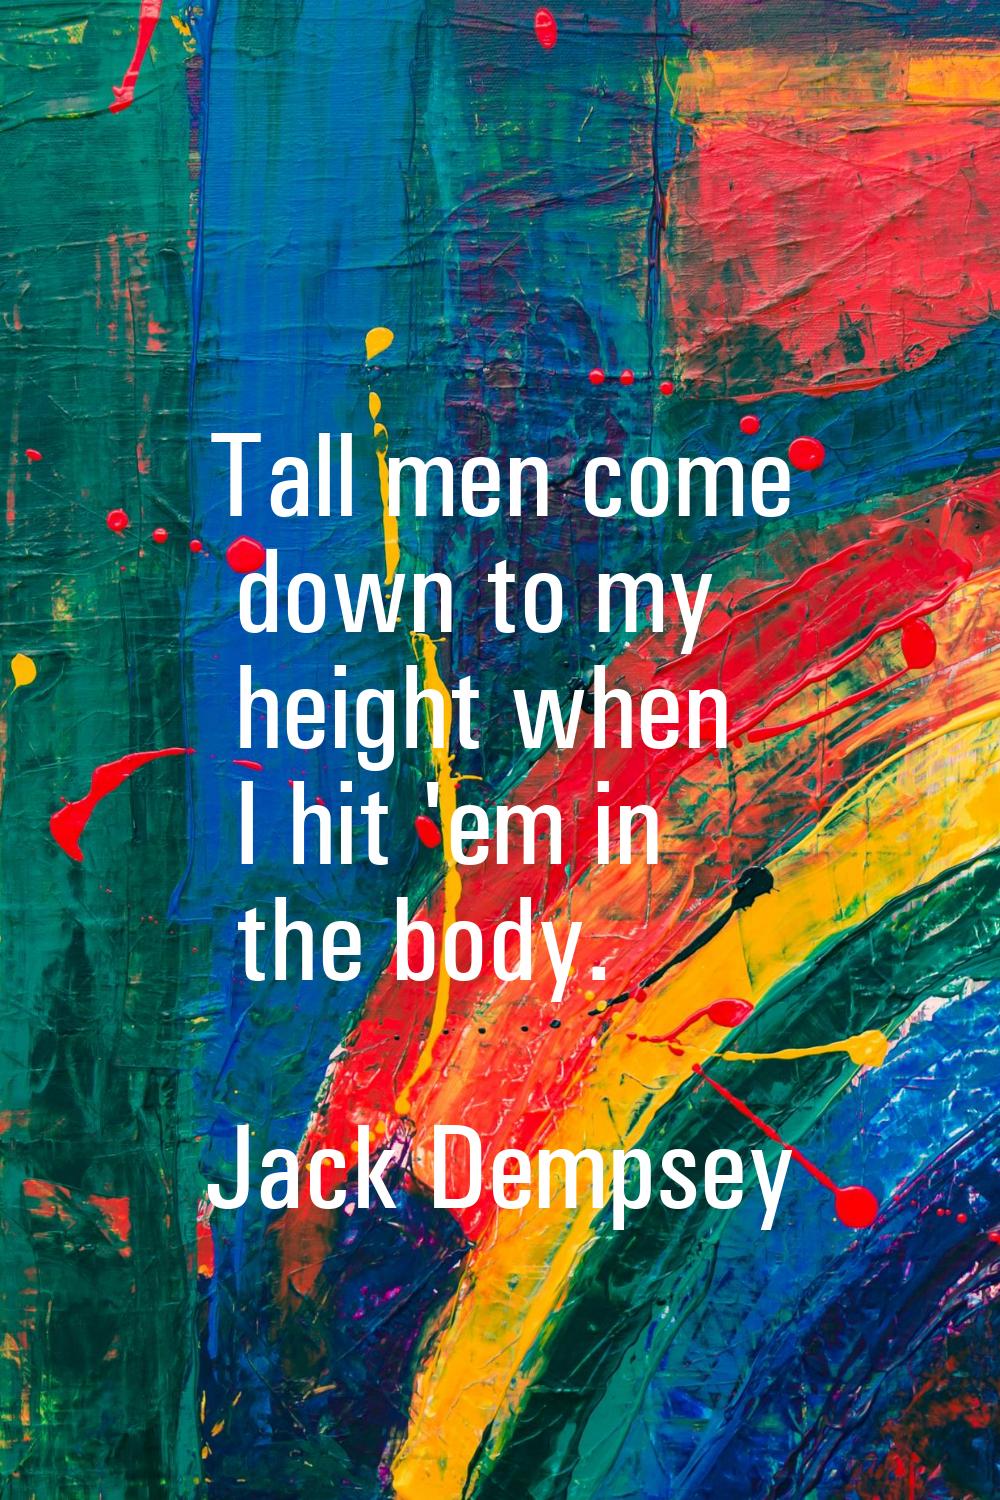 Tall men come down to my height when I hit 'em in the body.